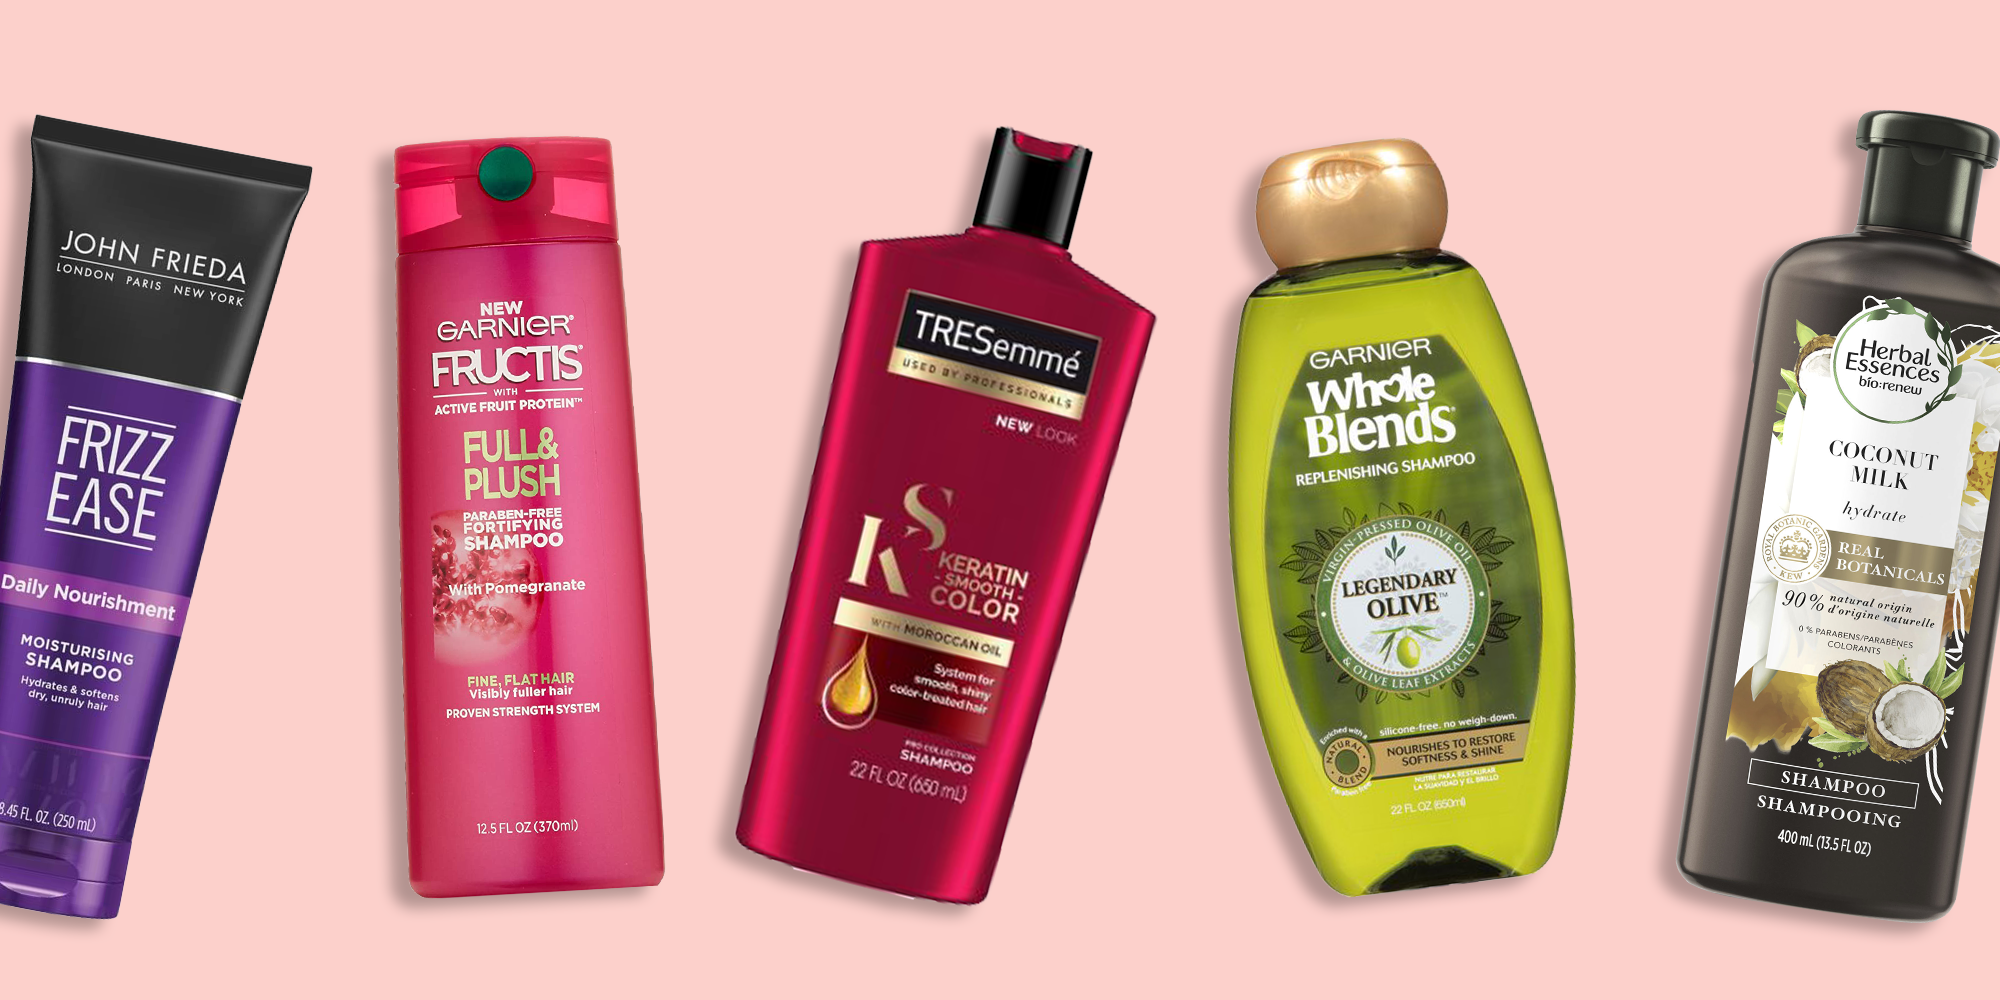 15 Best Shampoos of 2022 - Top Shampoo Brands for Every Hair Type & Texture